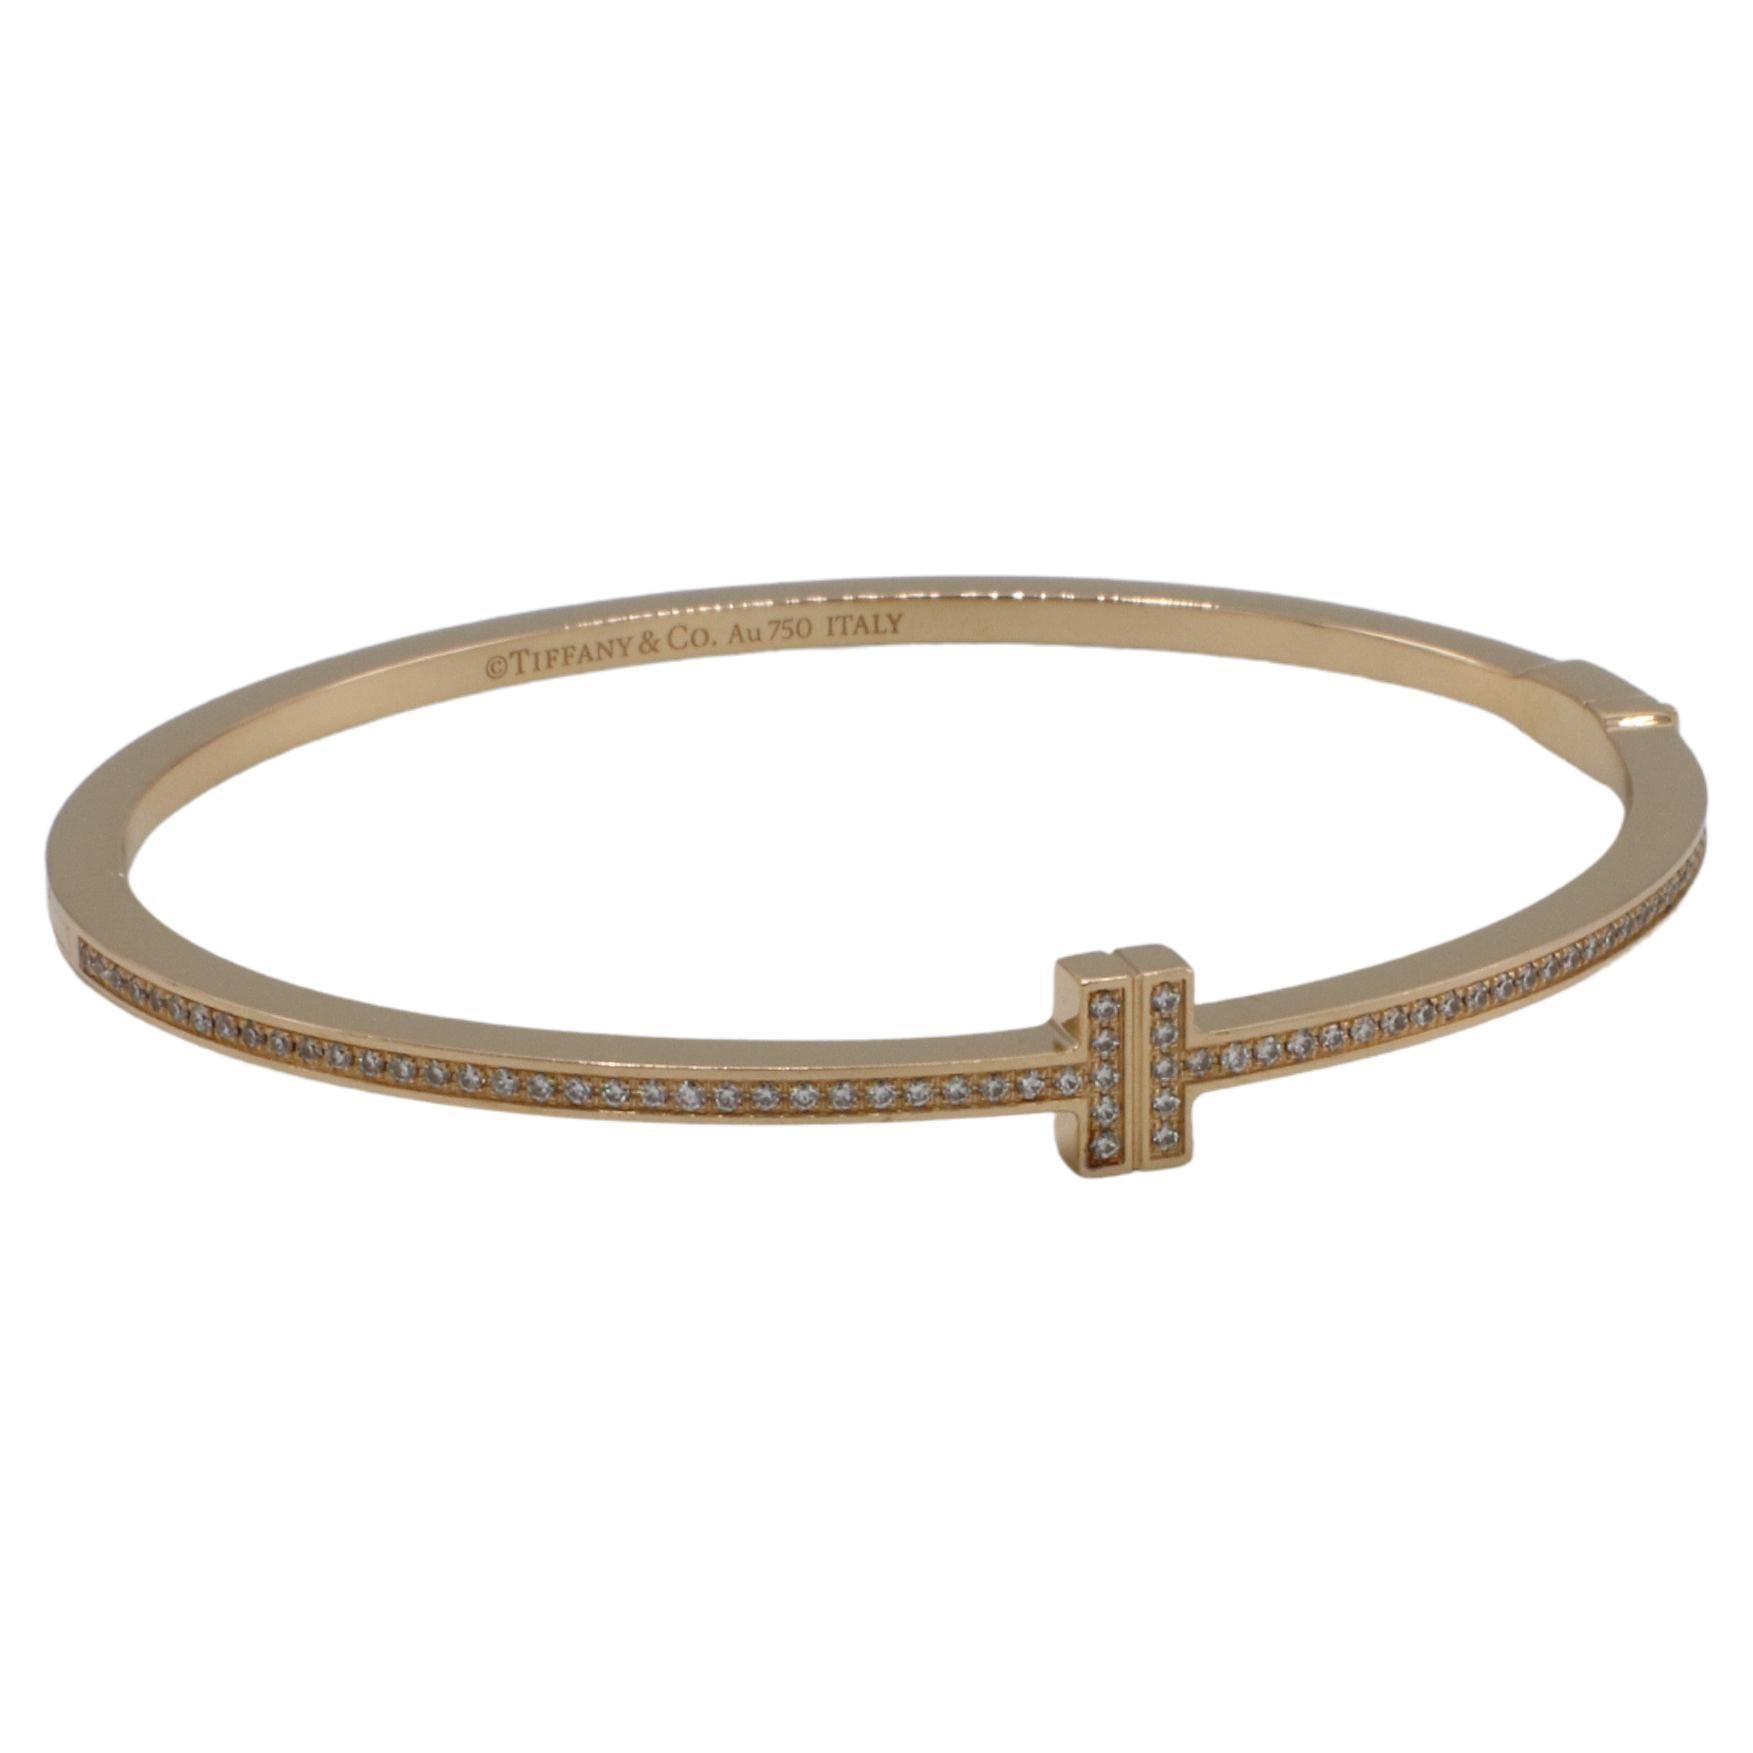 Tiffany & Co. T Diamond Hinged Wire Bangle in 18k Rose Gold
Metal: 18k rose gold
Weight: 16.5 grams
Diamonds: Approx. Carat total weight .33 G VS round diamonds
Size: Medium 6.5